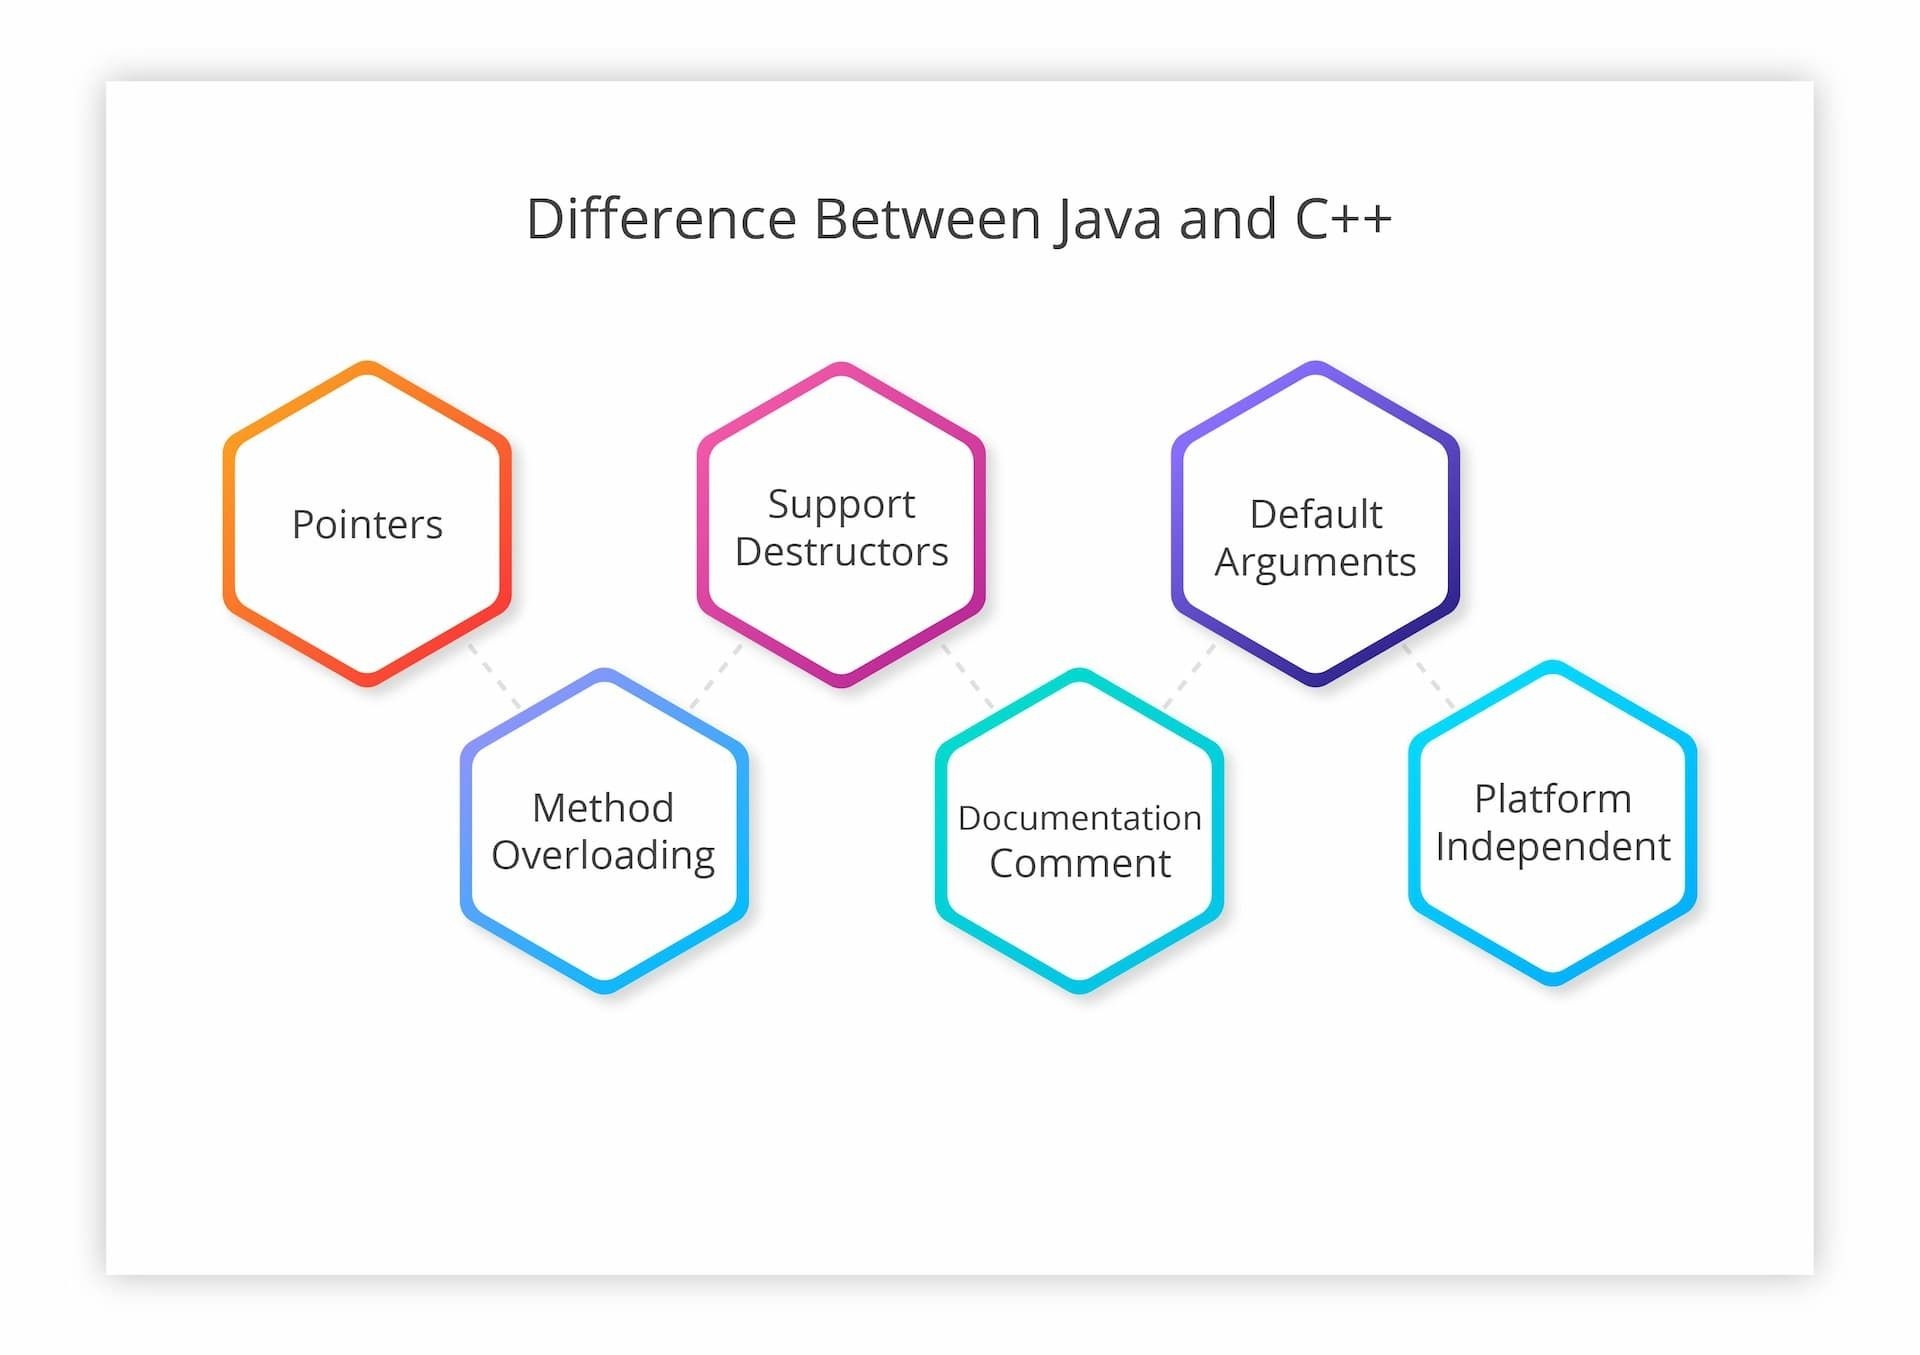 Differences Between C++ and Java